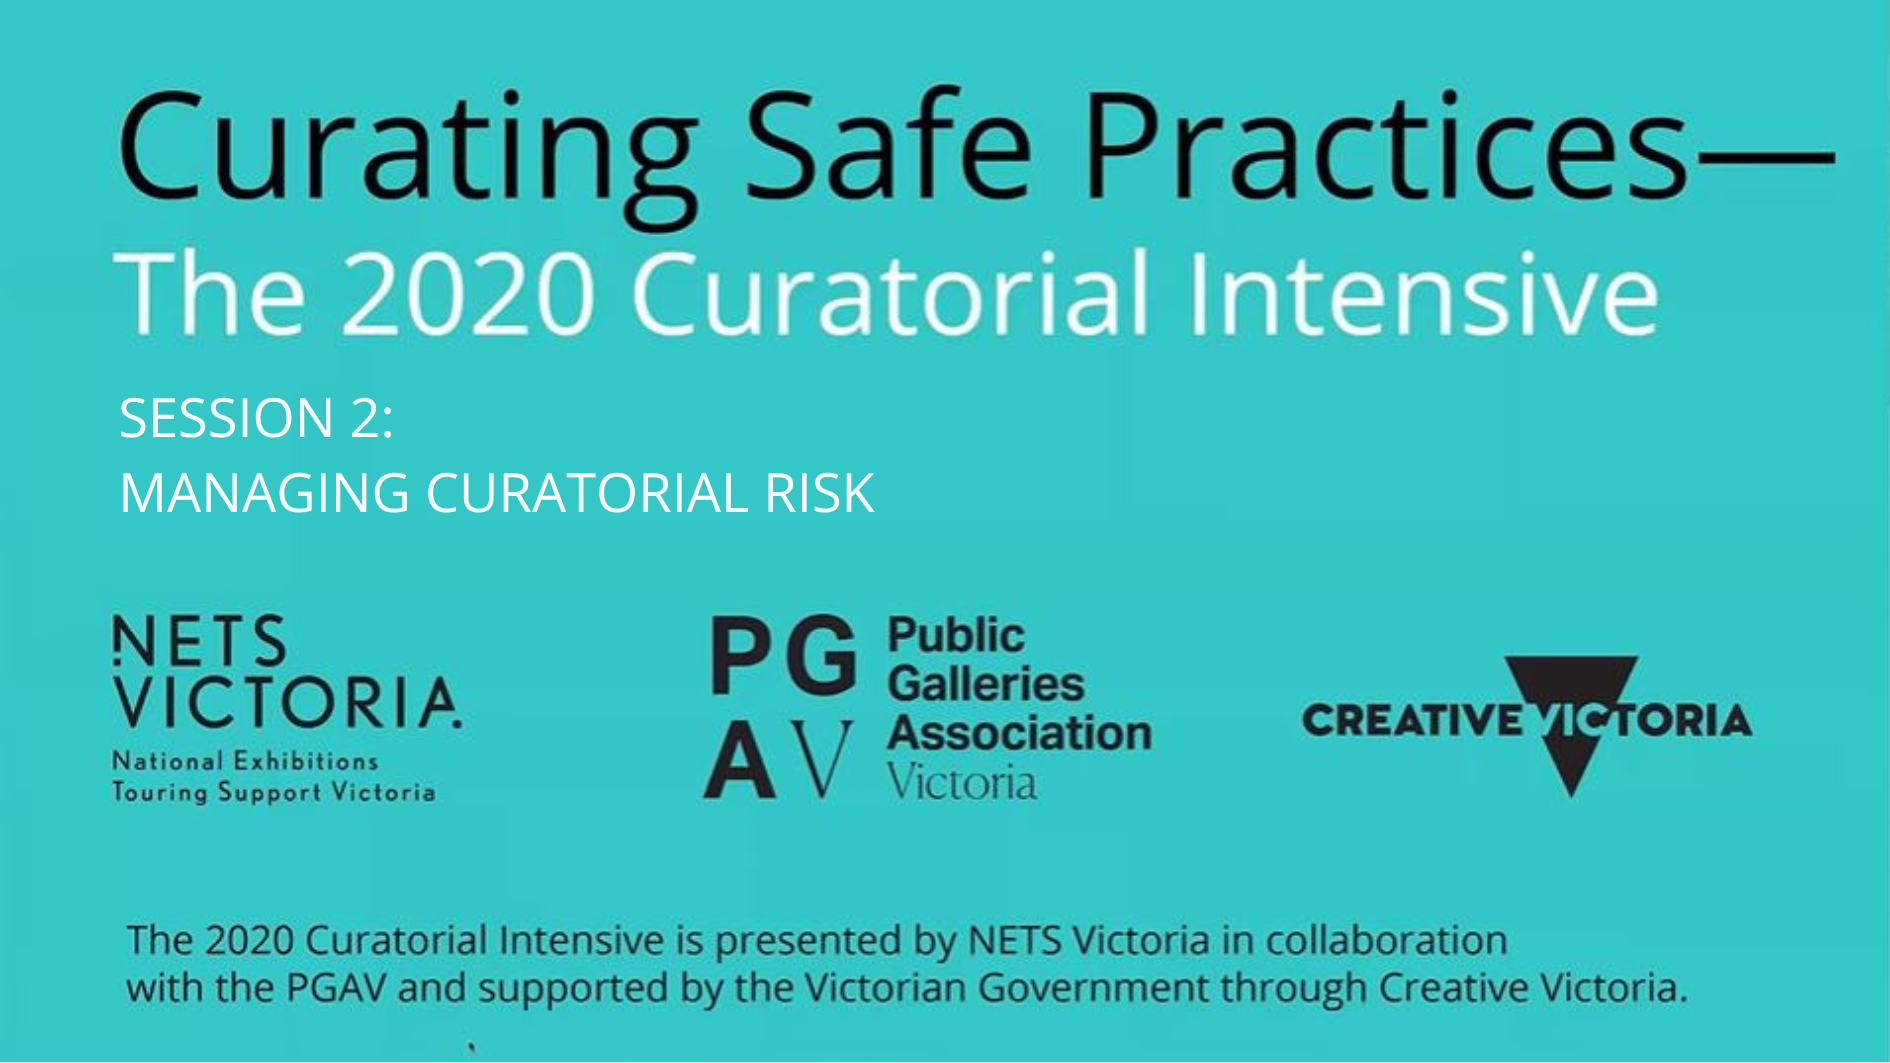 EVENT 2020 CURATORIAL INTENSIVE - SESSION 2